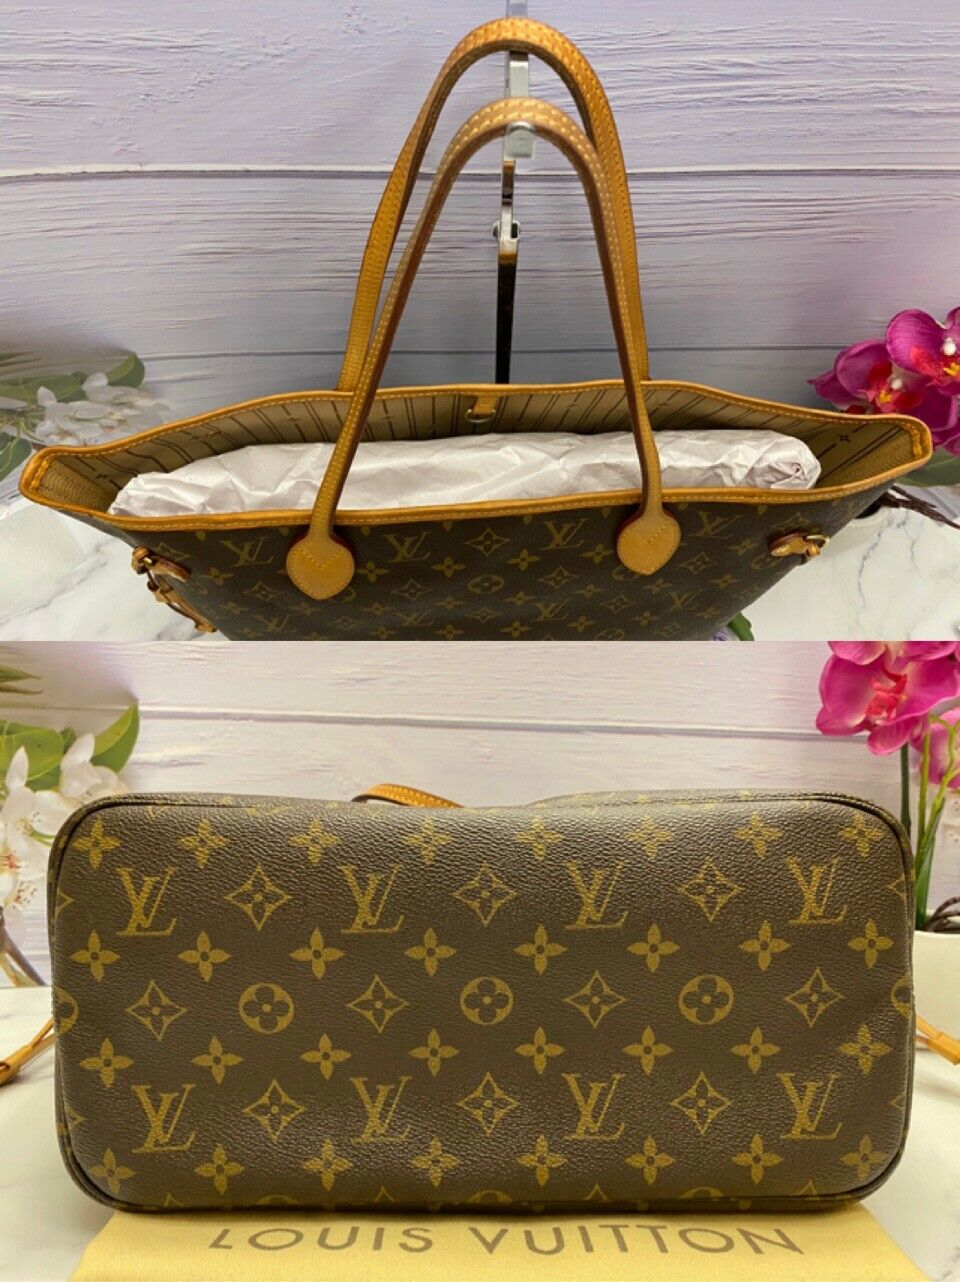 Louis Vuitton Neverfull Bags for sale in Ashley, New South Wales